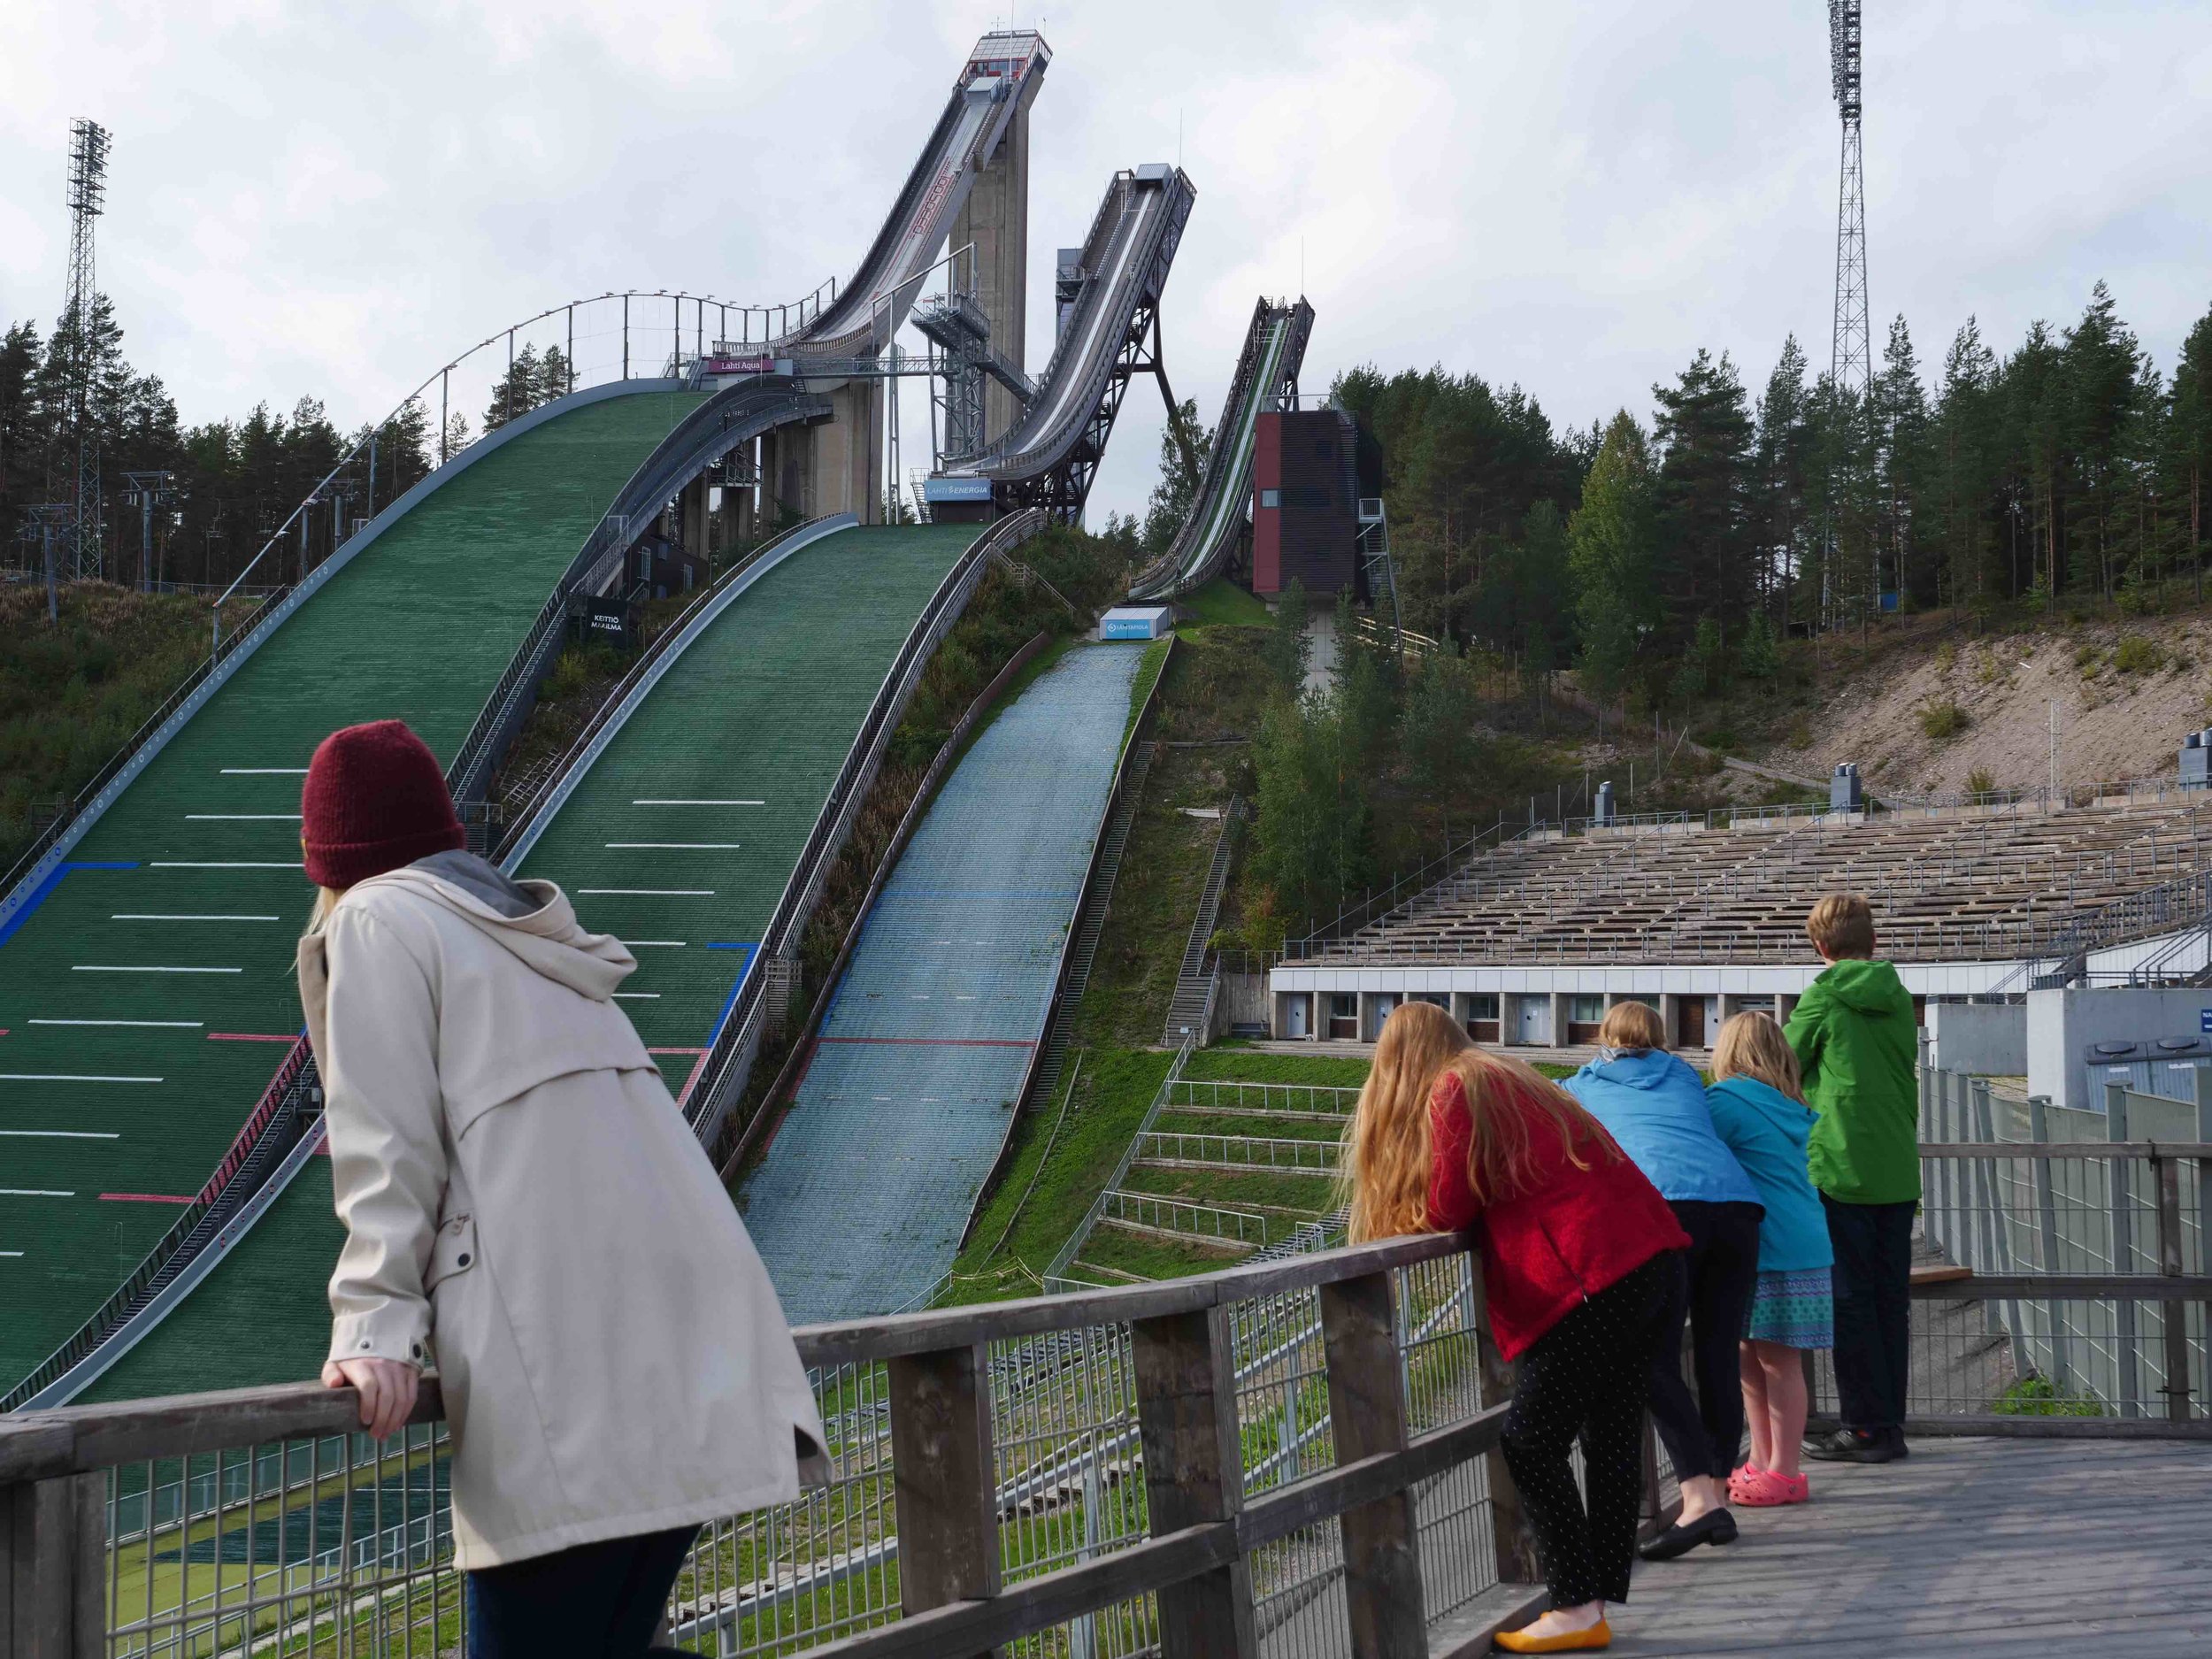  The ski jumps of Lahti, where Finnish athletes train for the Olympics and other winter sport competitions. 